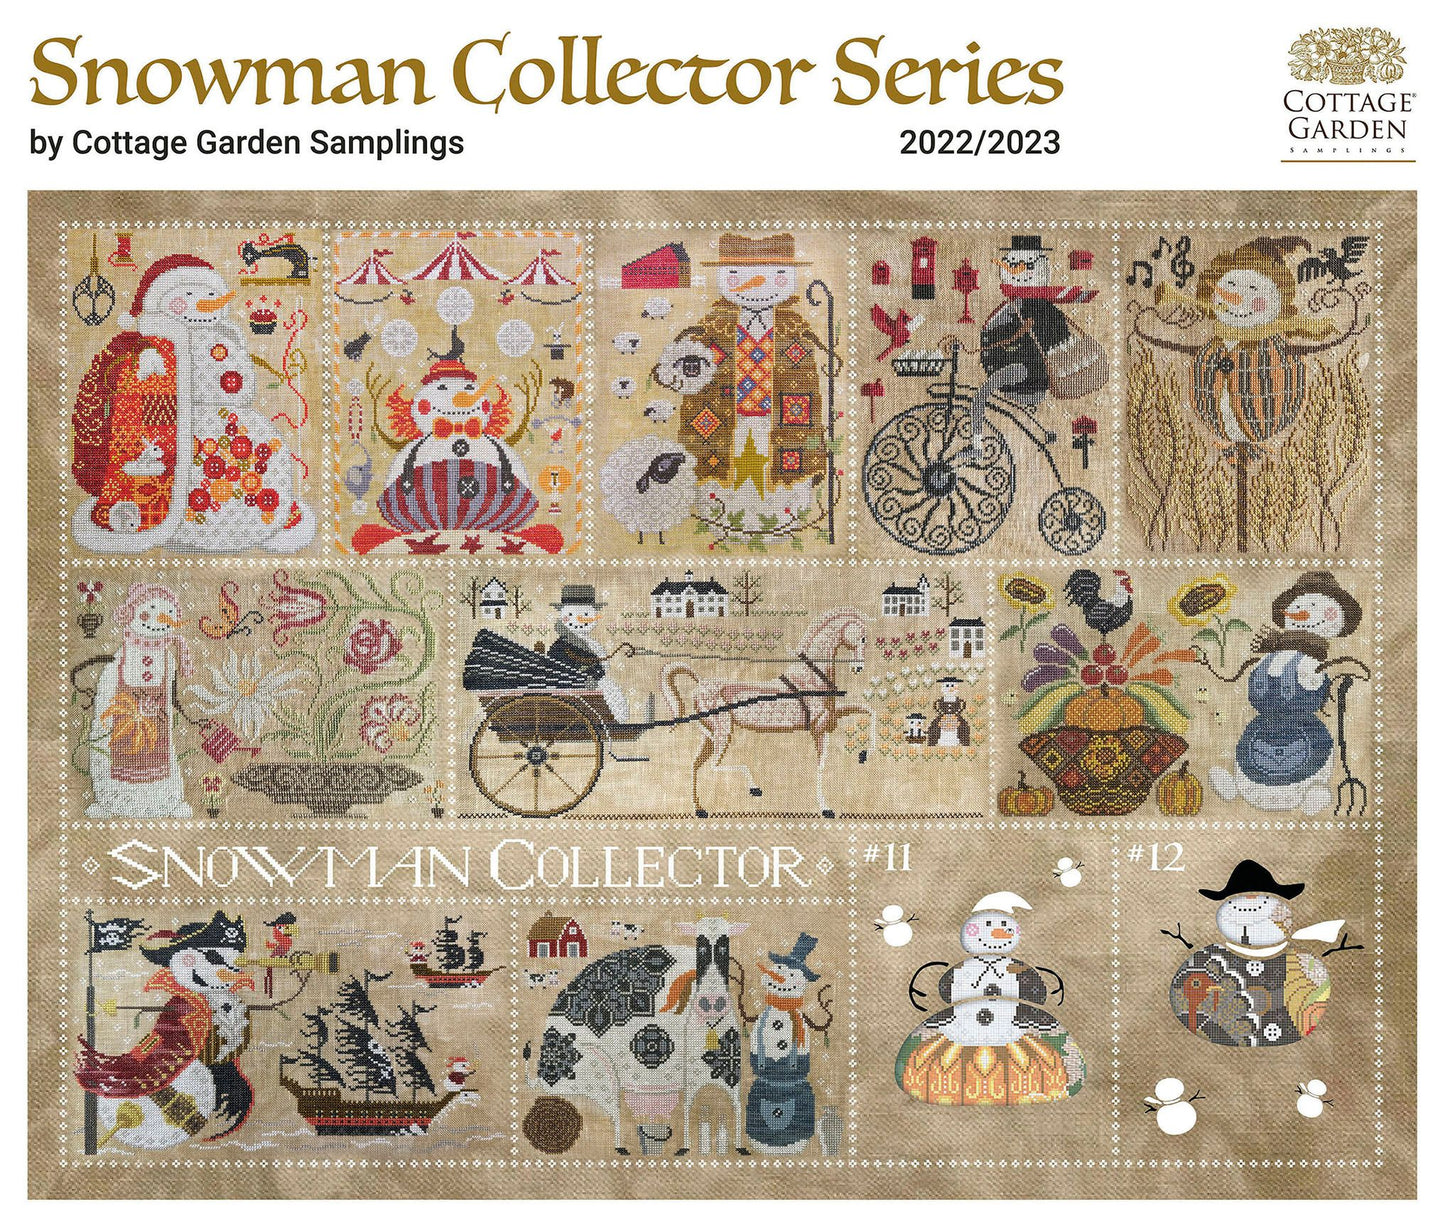 Snowman Collector #10 The Countryman - Cross Stitch Pattern by Cottage Garden Samplings